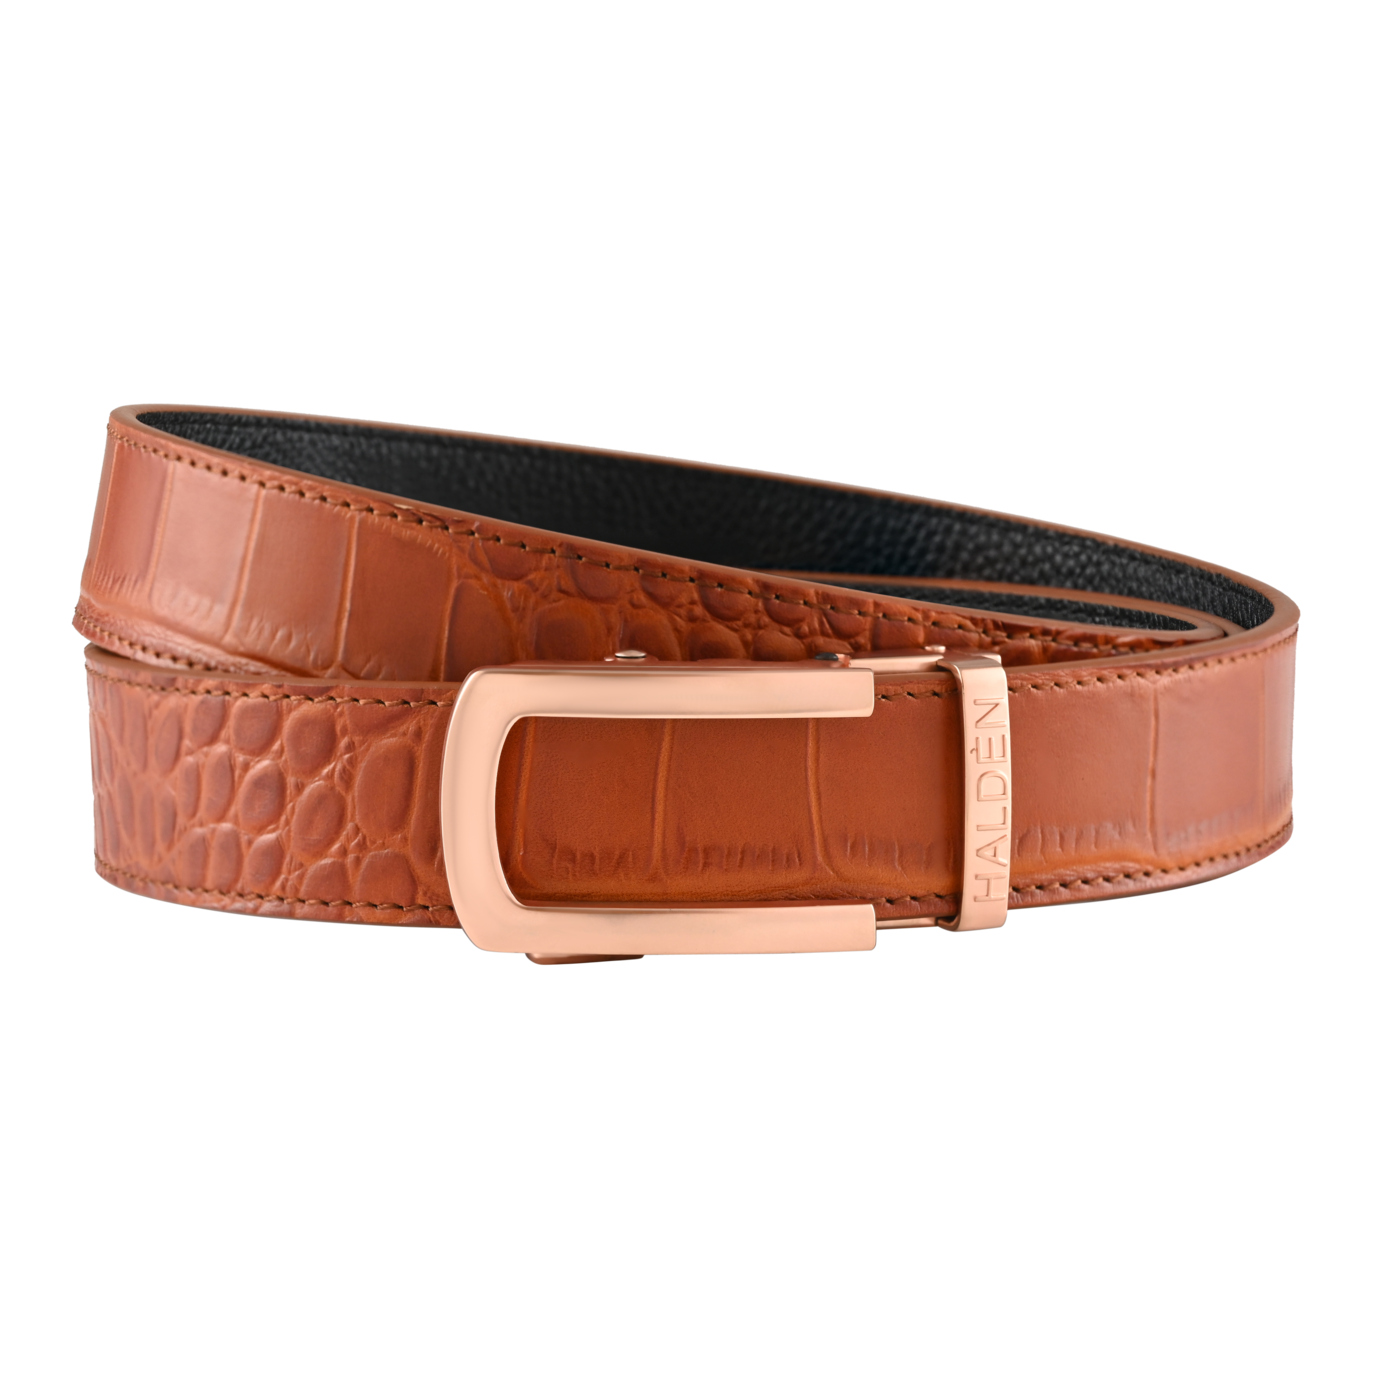 Daven Tan with classic buckle